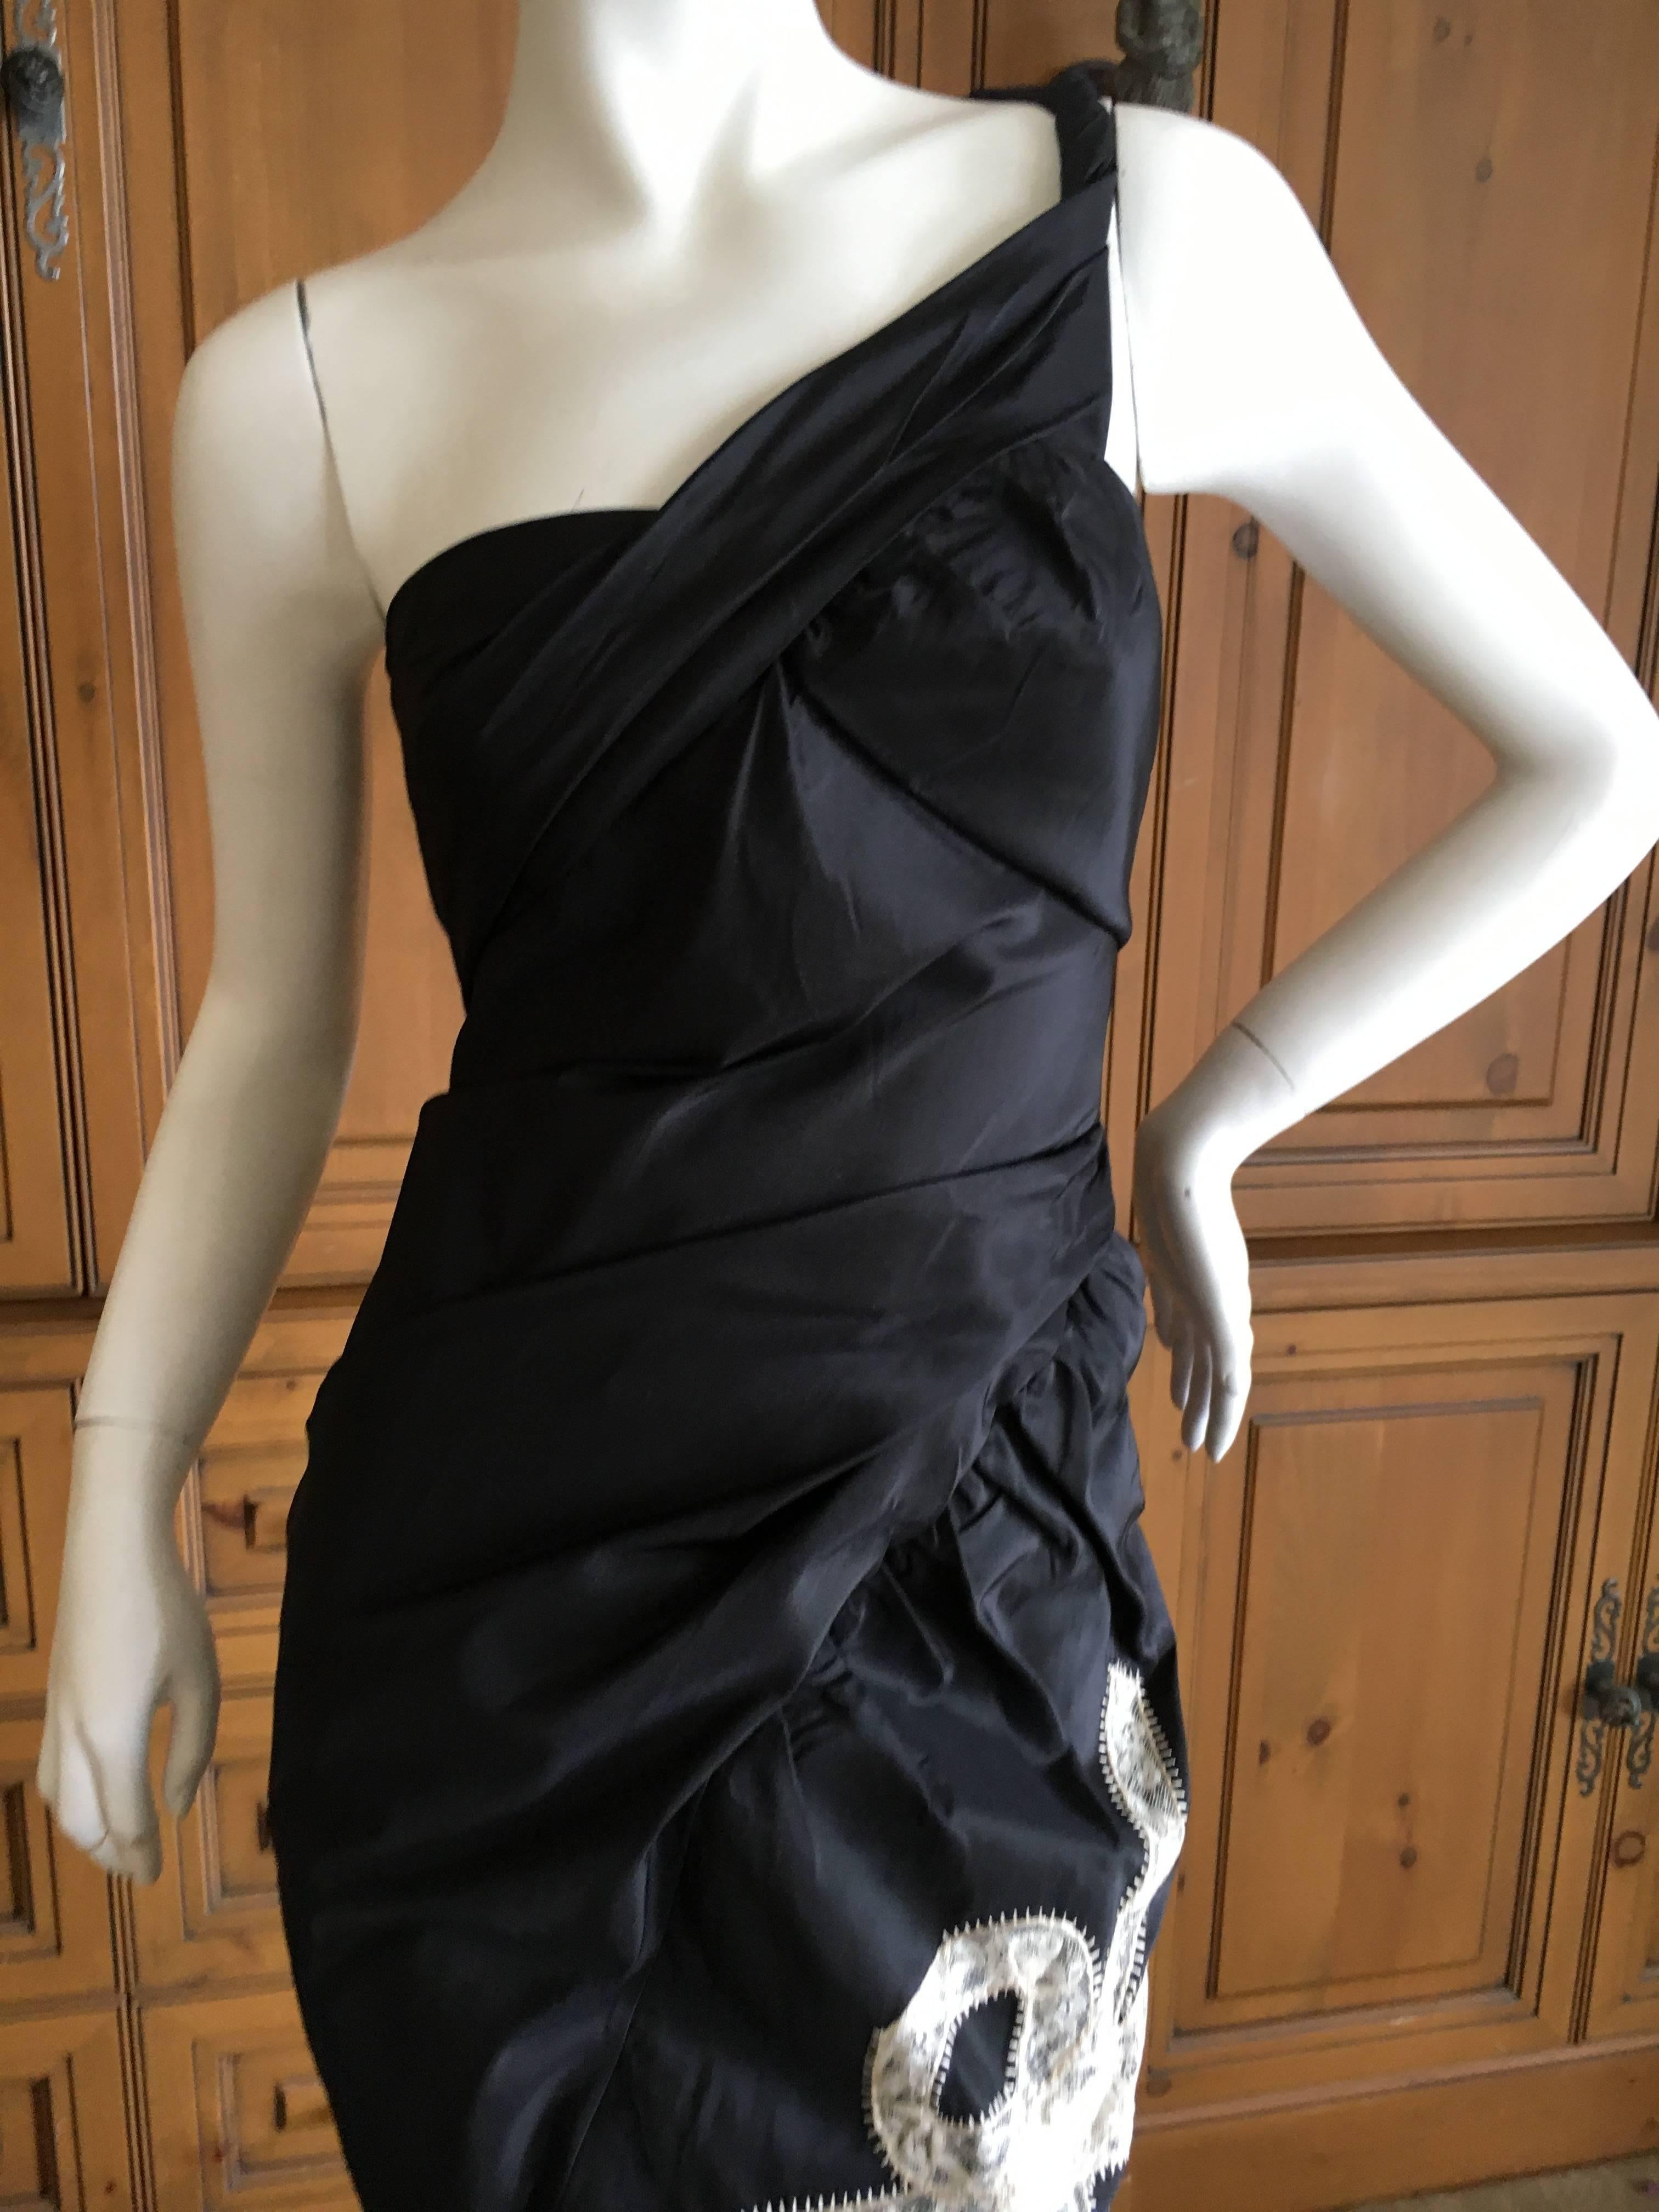 Magnificent evening gown in black taffeta from John Galliano.
There is a dramatic train and lace embellishments.
Bust 38